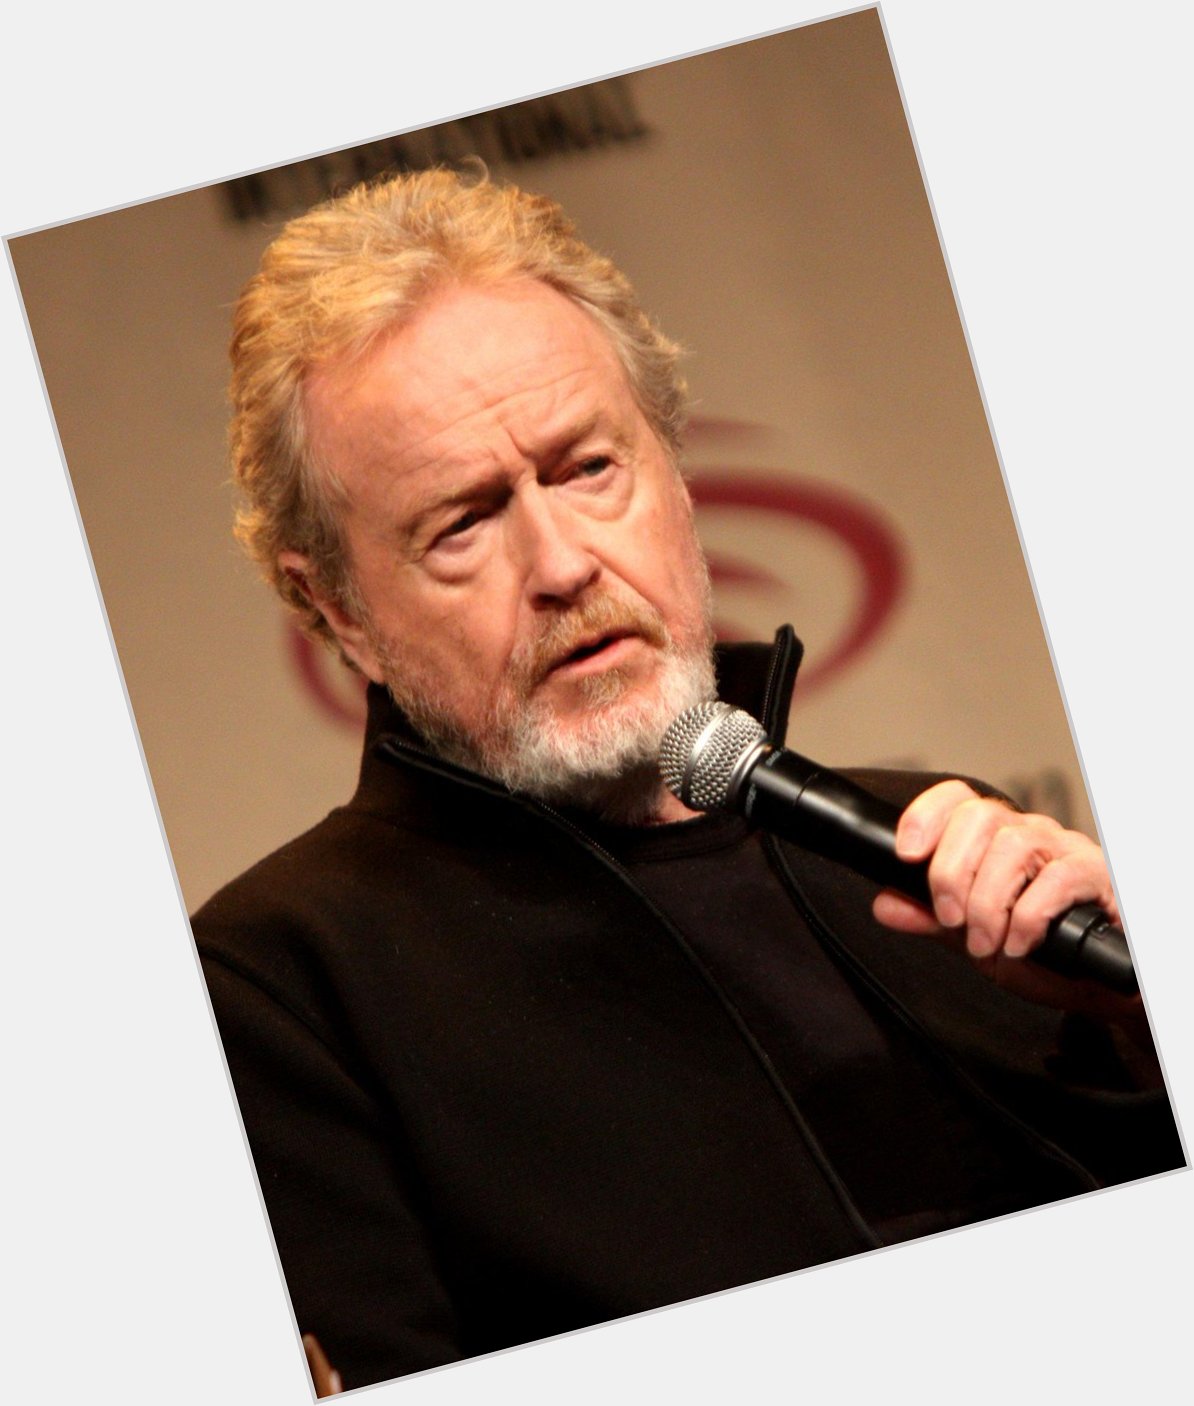 Hes brought some EPIC films to our screens!

A BIG happy birthday goes to Ridley Scott!

Whats been your fav film? 